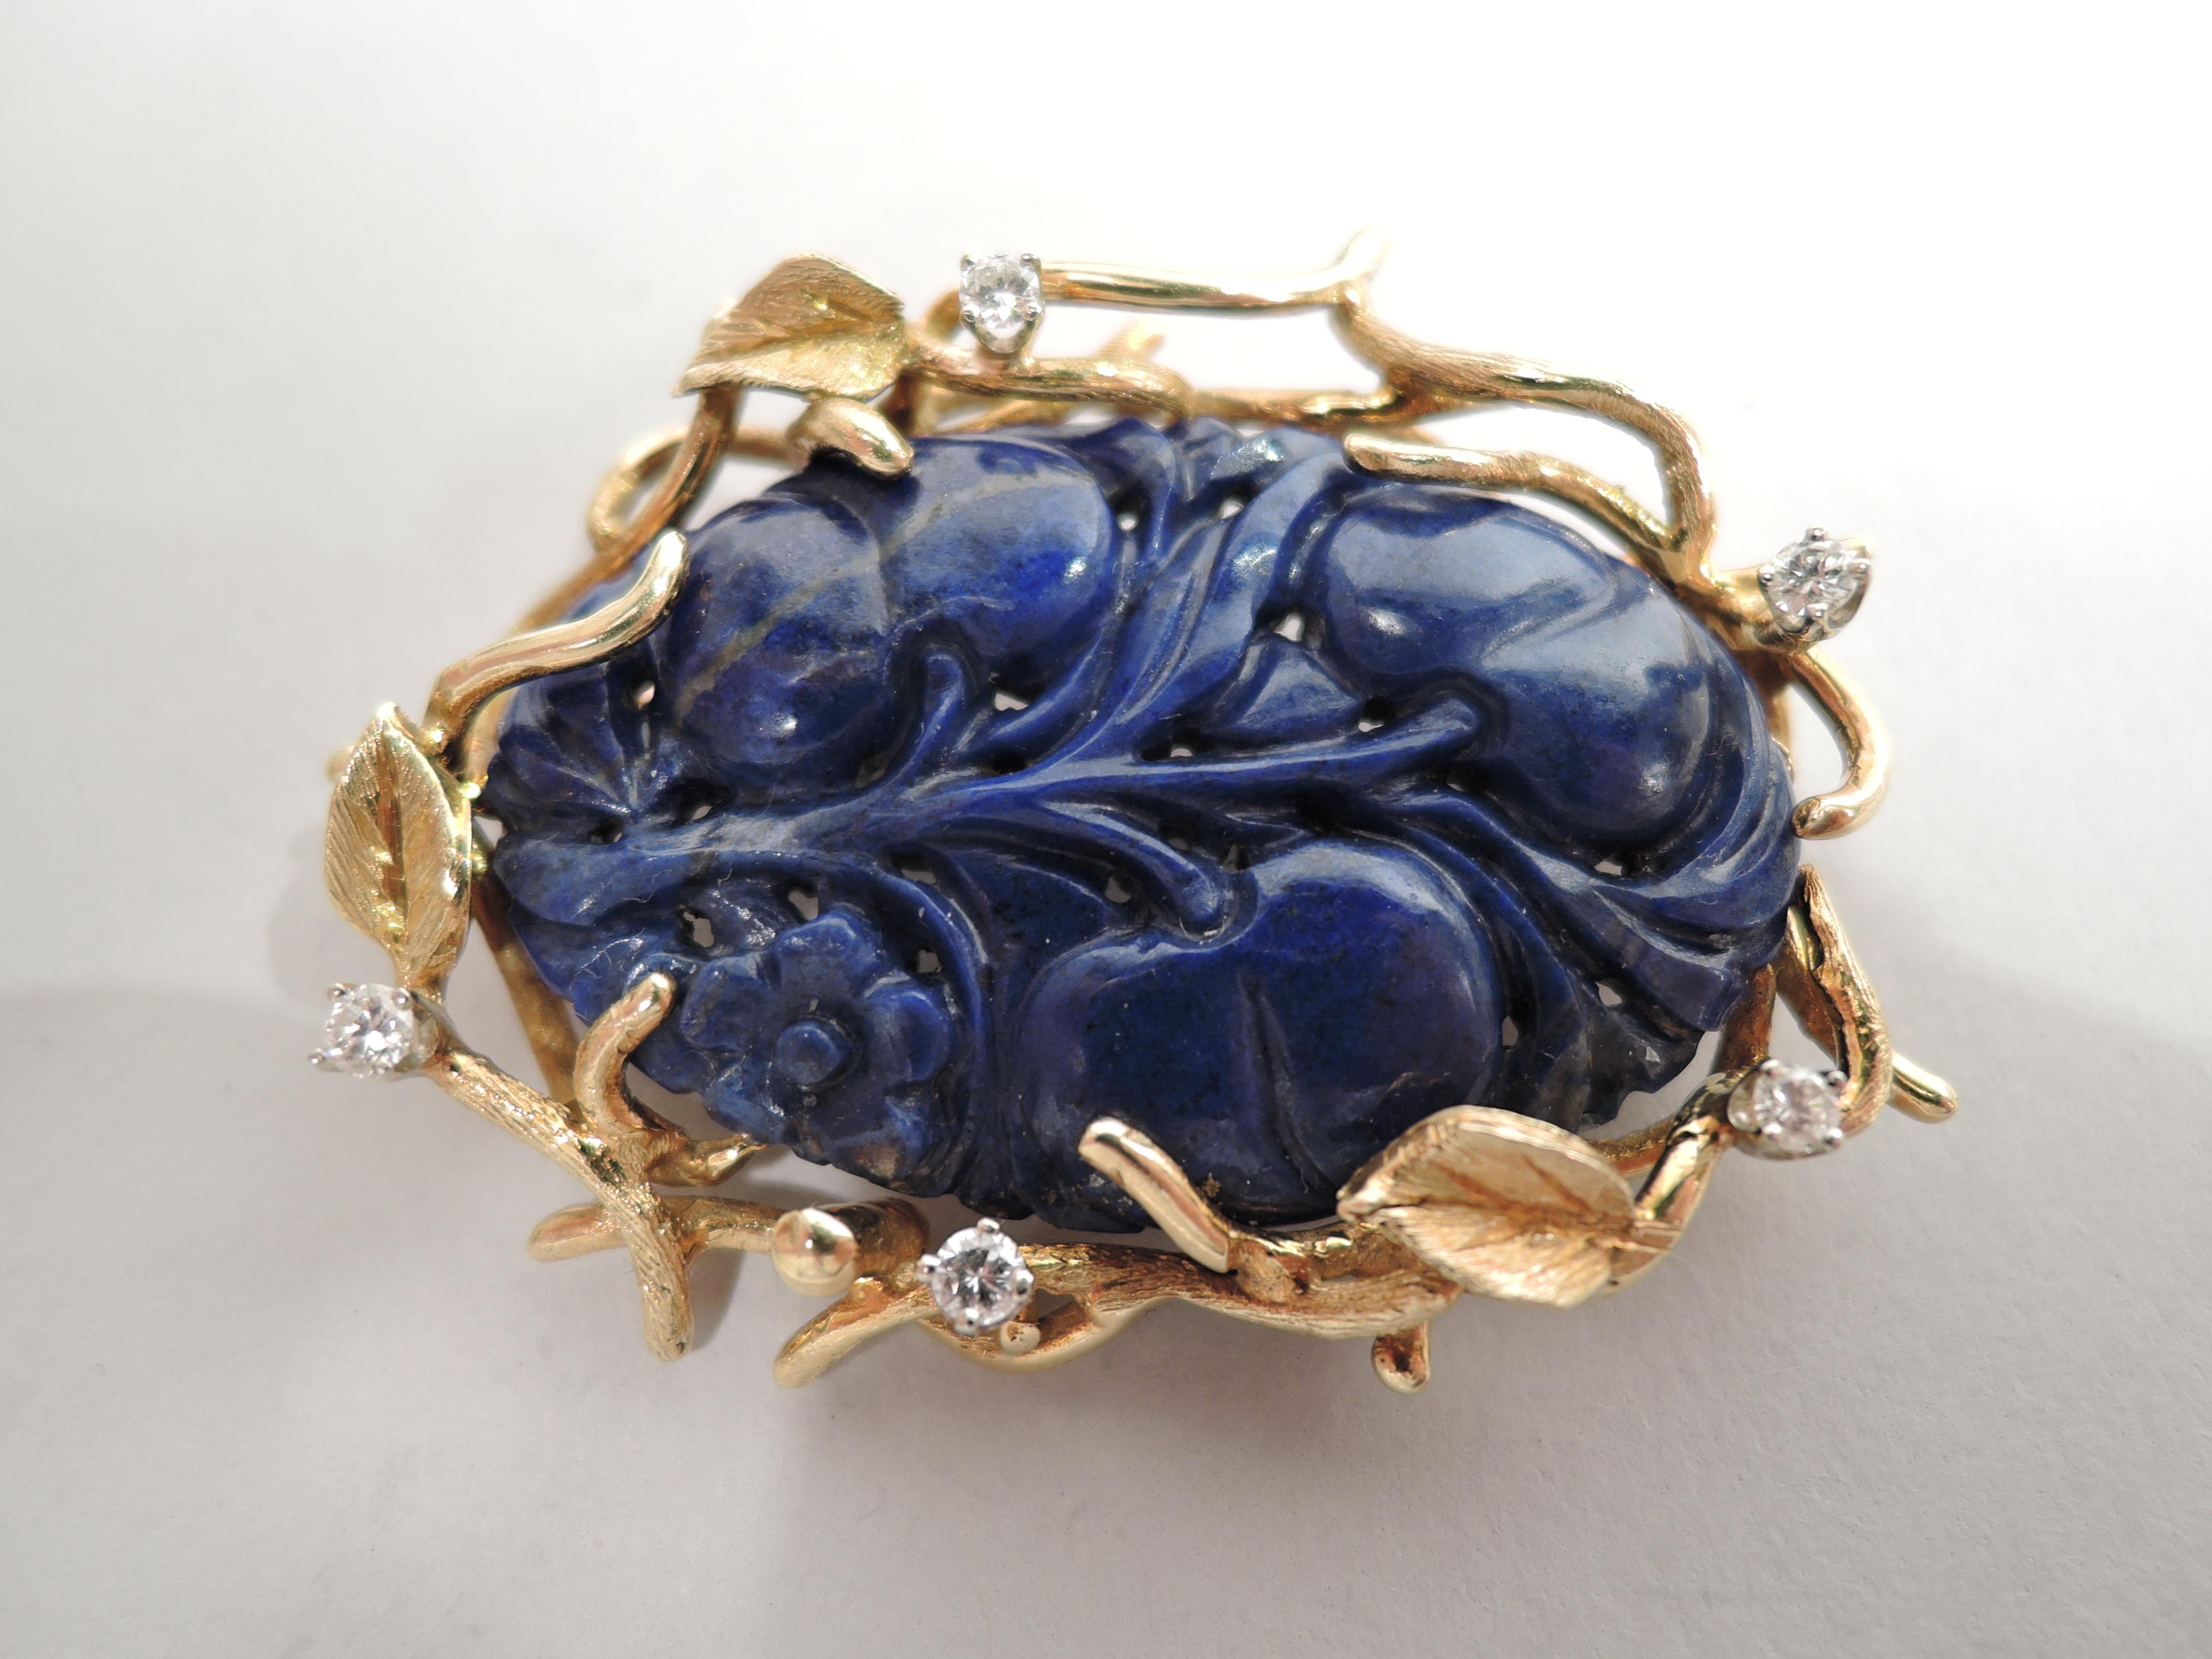 Beautiful Midcentury Modern brooch. Carved oval leaf and flower lapis in 18k yellow gold leaf-and-branch mount interspersed with five diamonds. United States, ca 1960s.